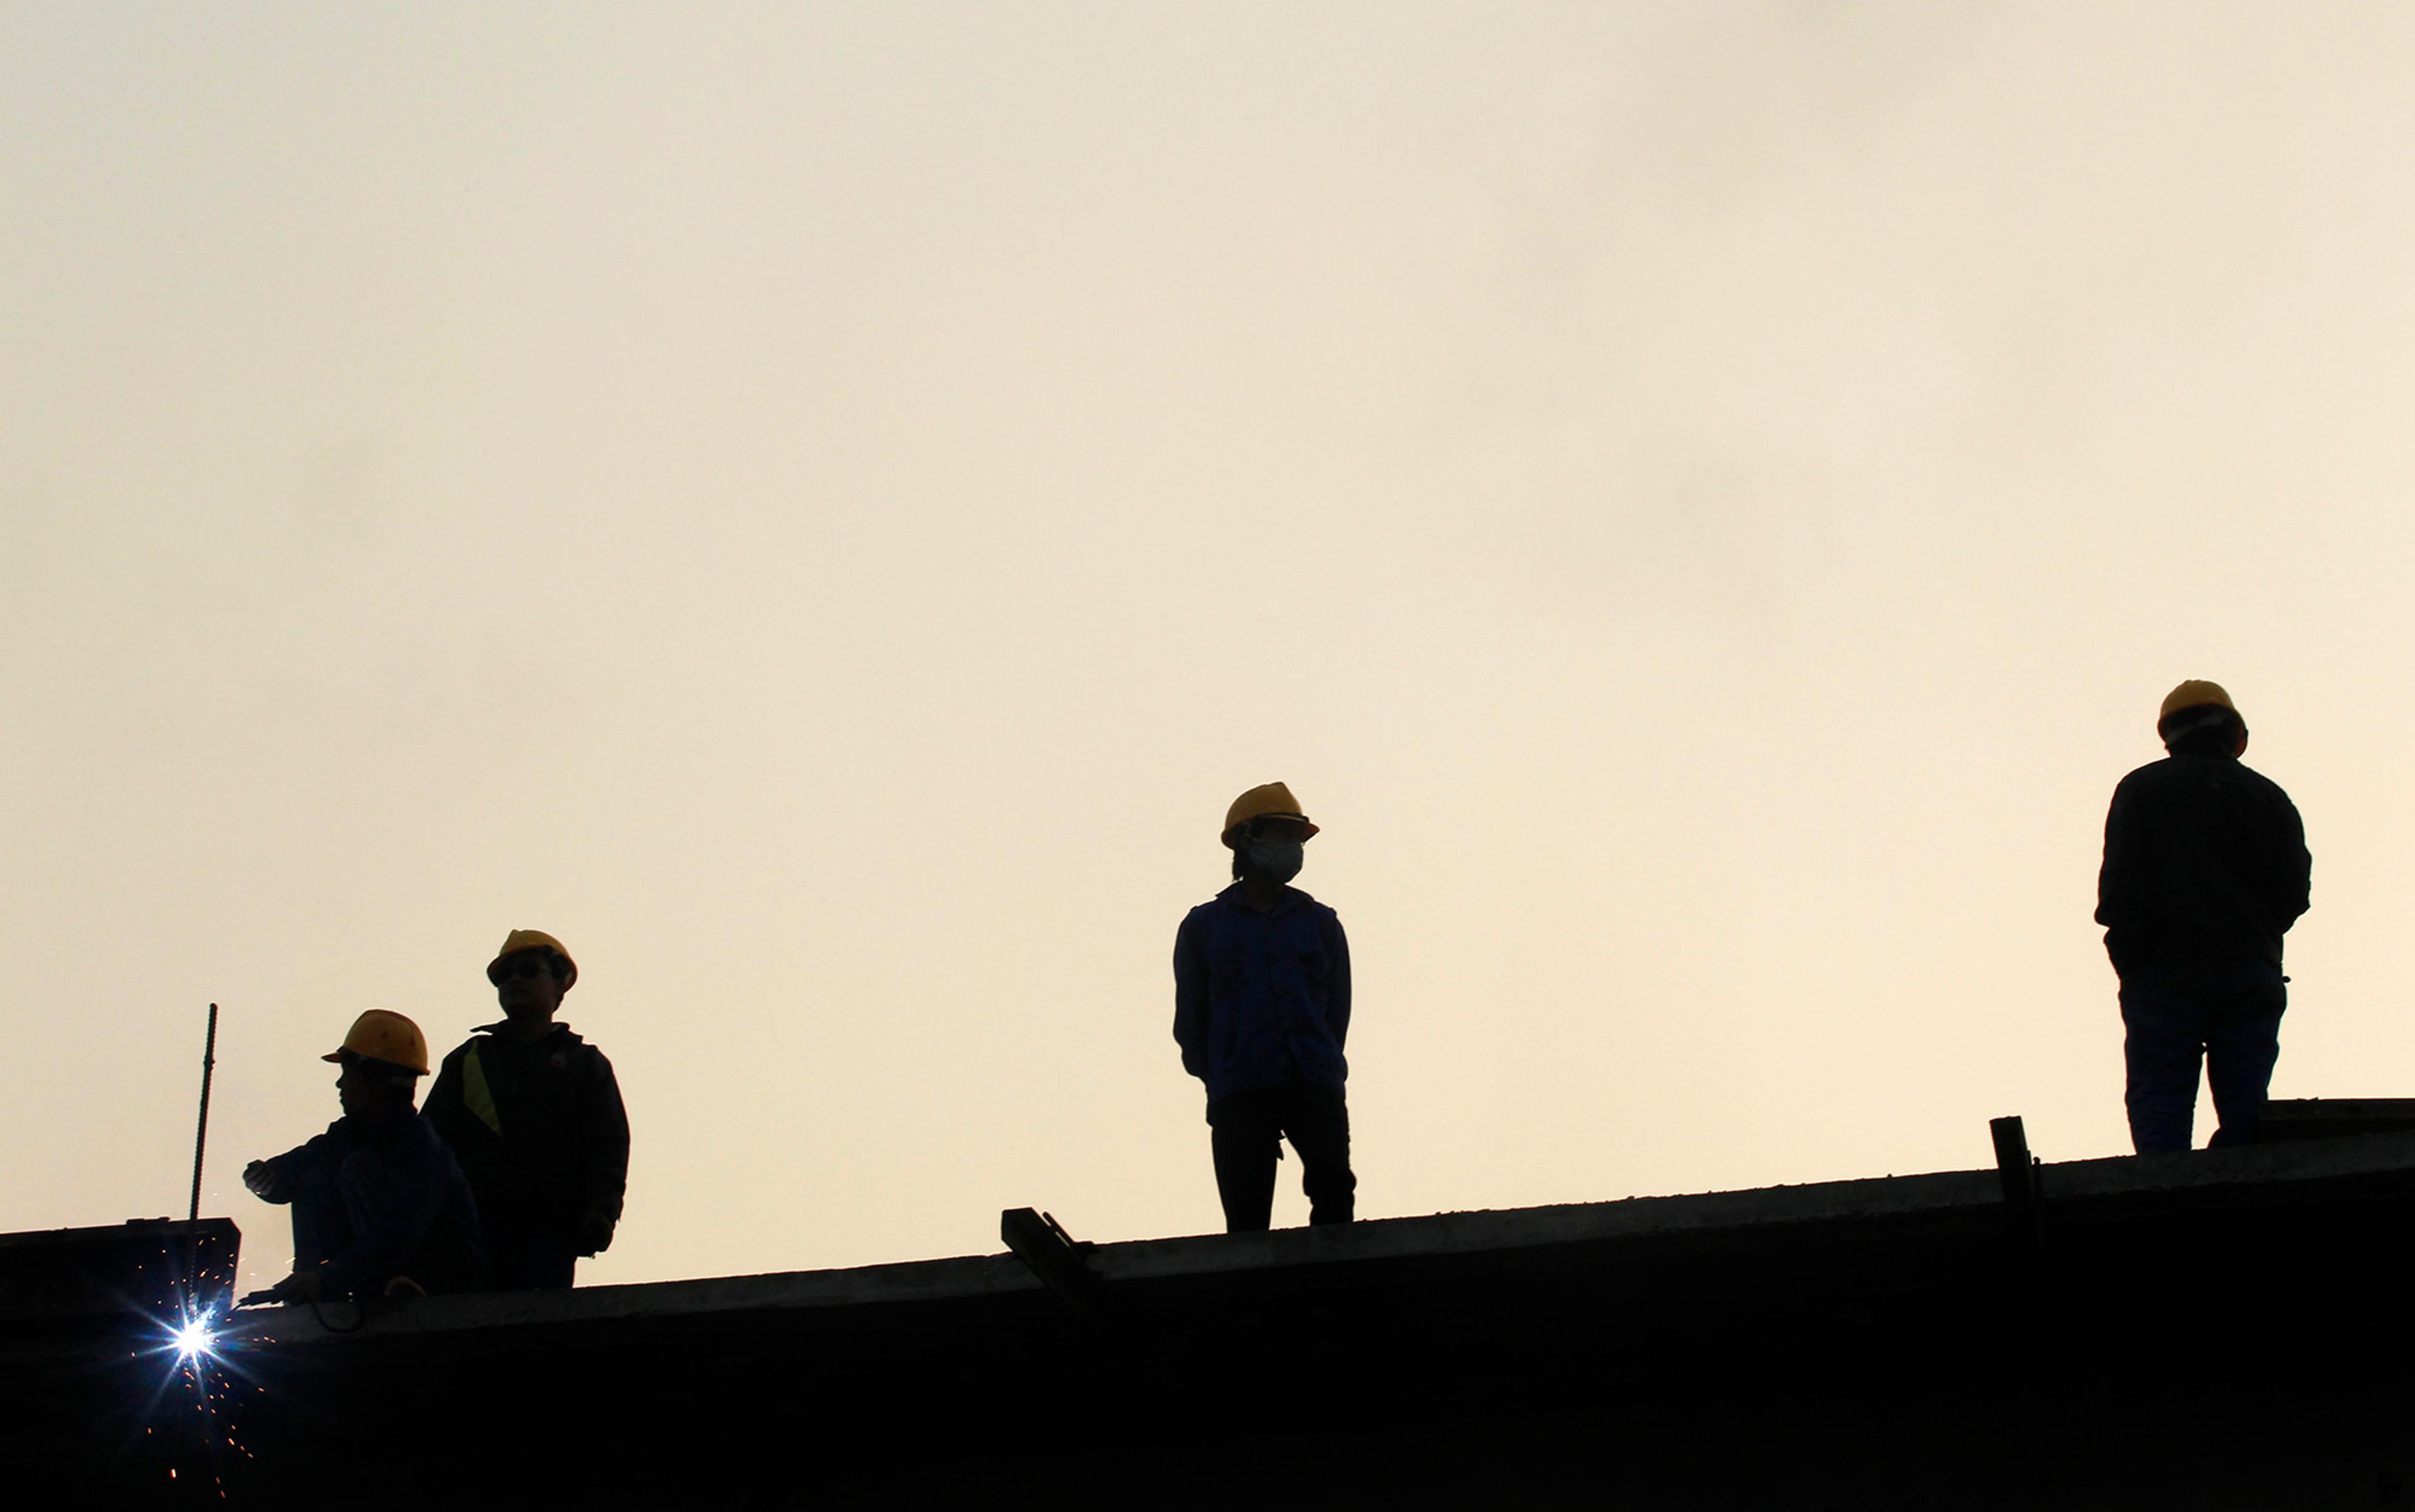 Silhouettes of four construction workers in hard hats standing on a beam against a sunset or sunrise sky. One worker is crouching and appearing to weld, emitting sparks.